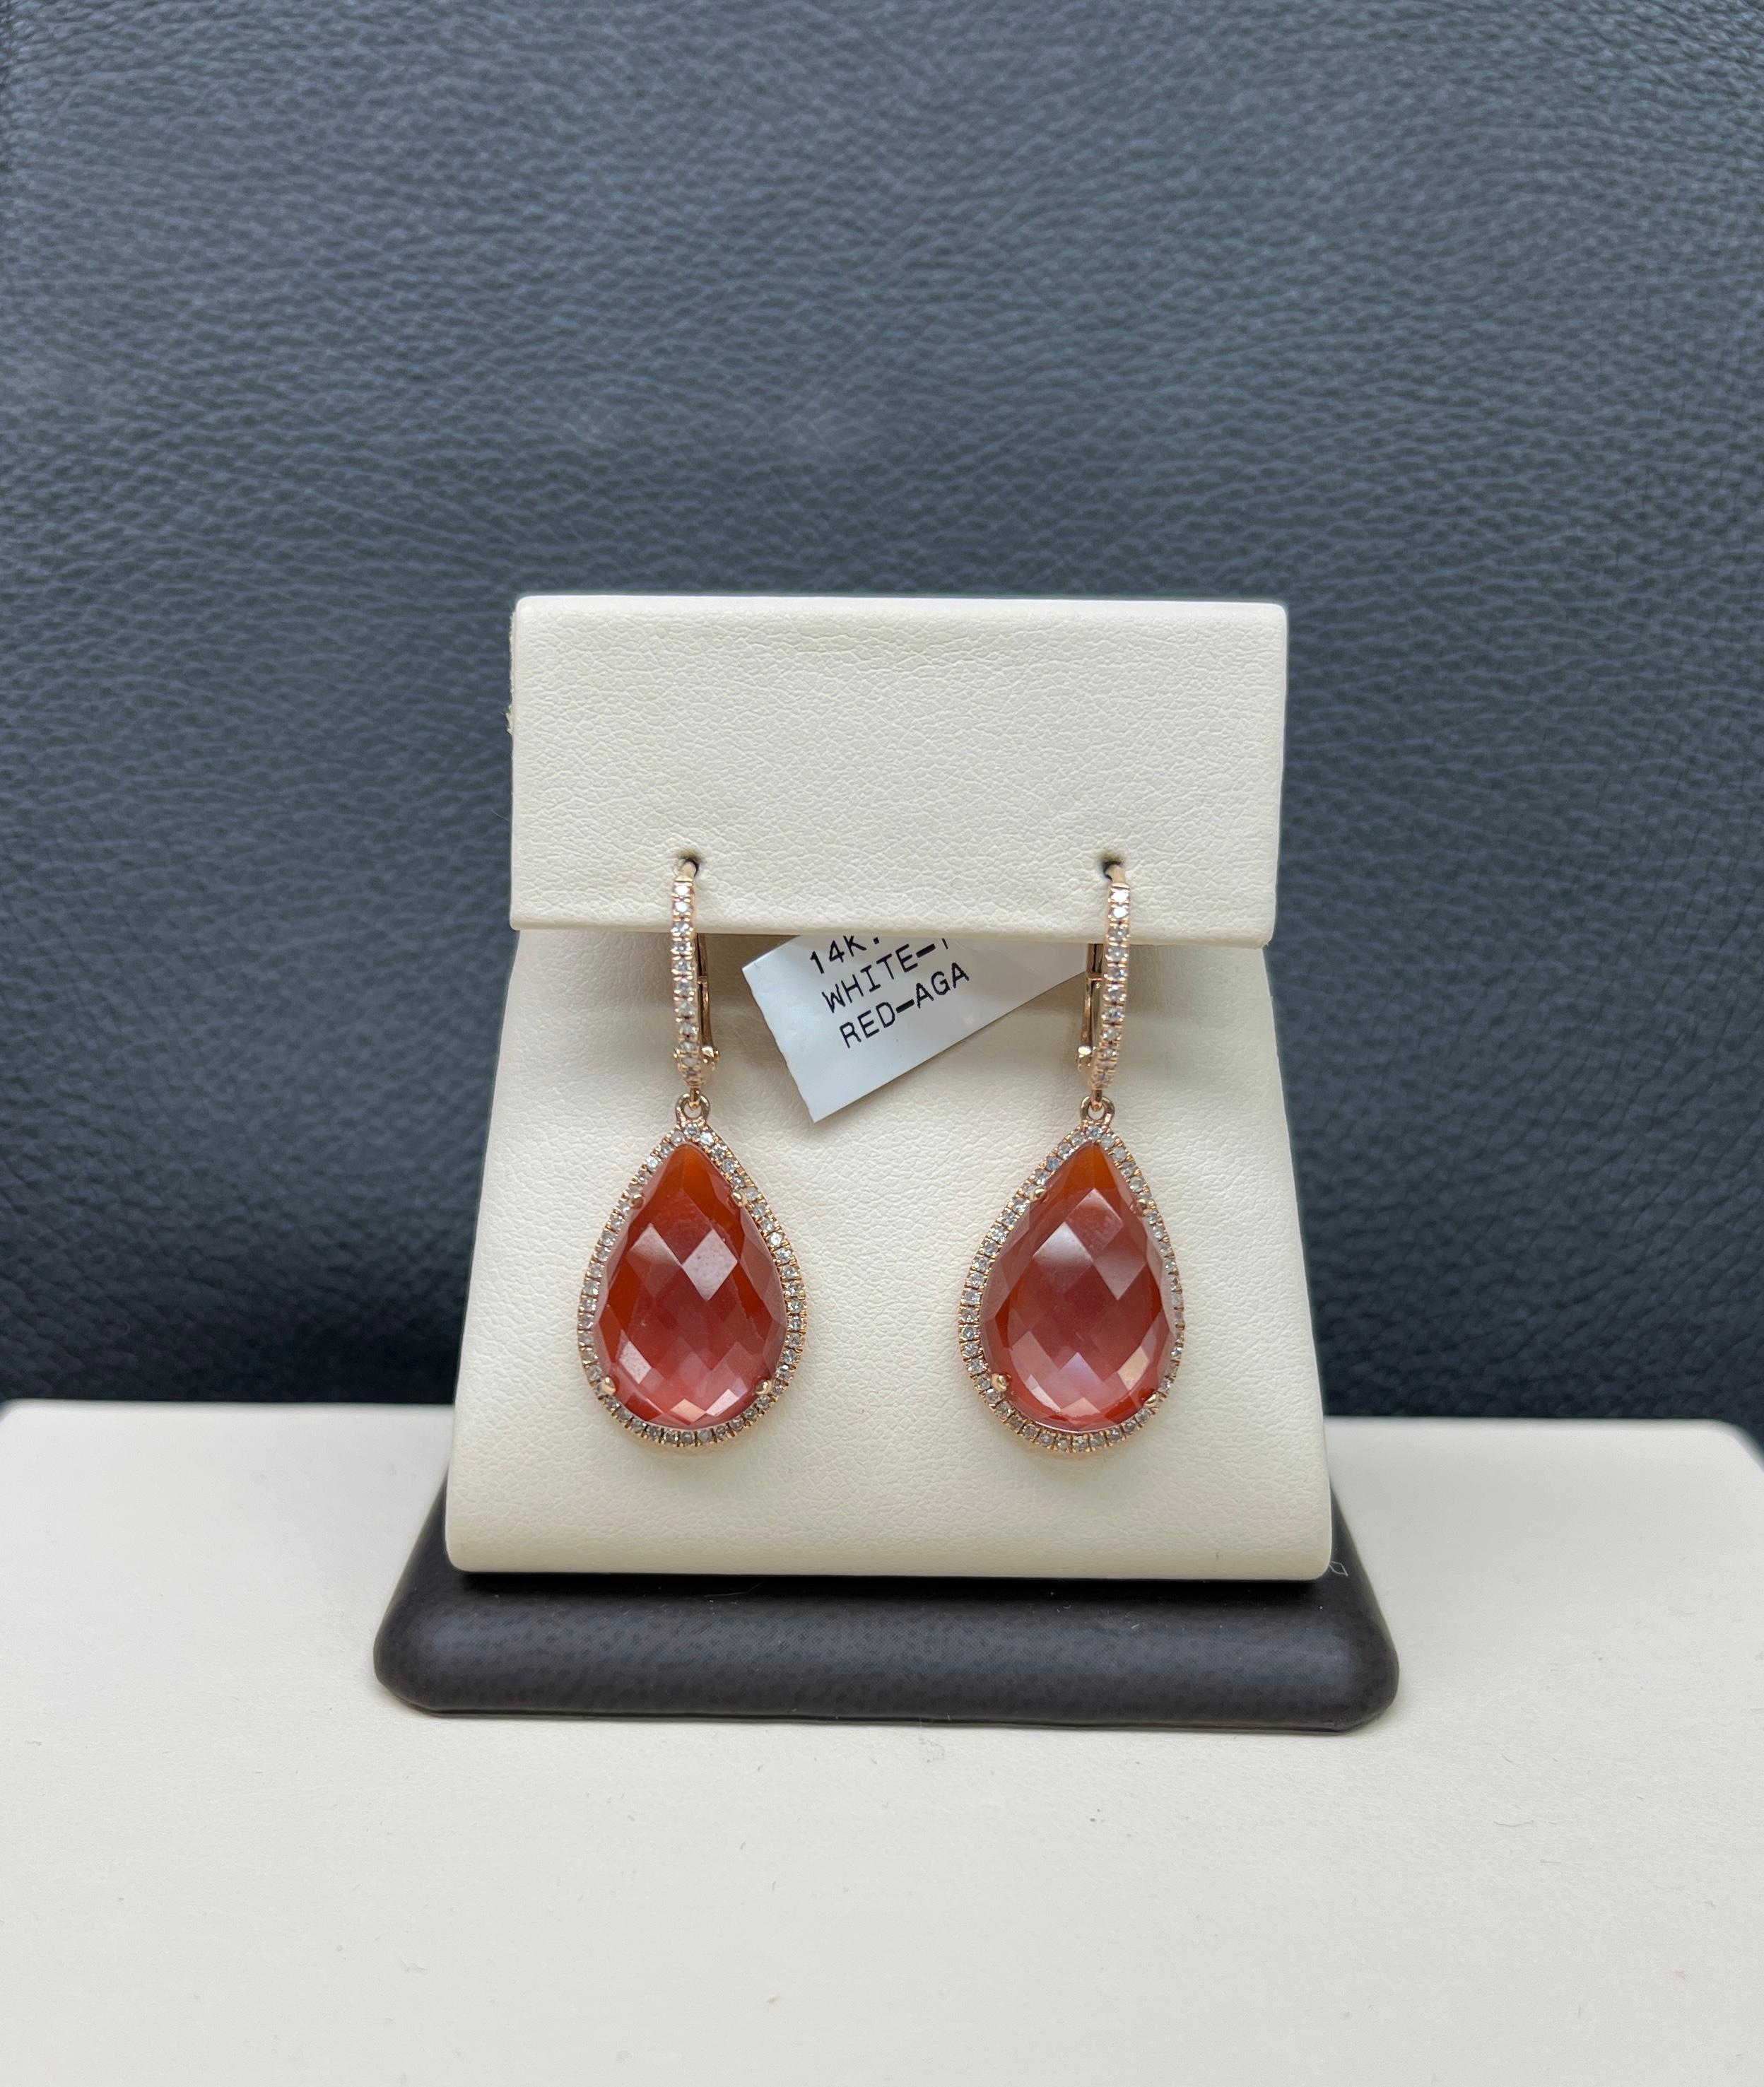 14K Solid Rose Gold Diamond Red Agate Earrings 
High Polish Finish  
Handset Natural White Diamond .48 Total Carat Weight 
Excellent Full Cut Round Stones H Color SI 
Natural Pear Shape Red Agate Gem Stones  
Natural White Topaz Backing
Brand New